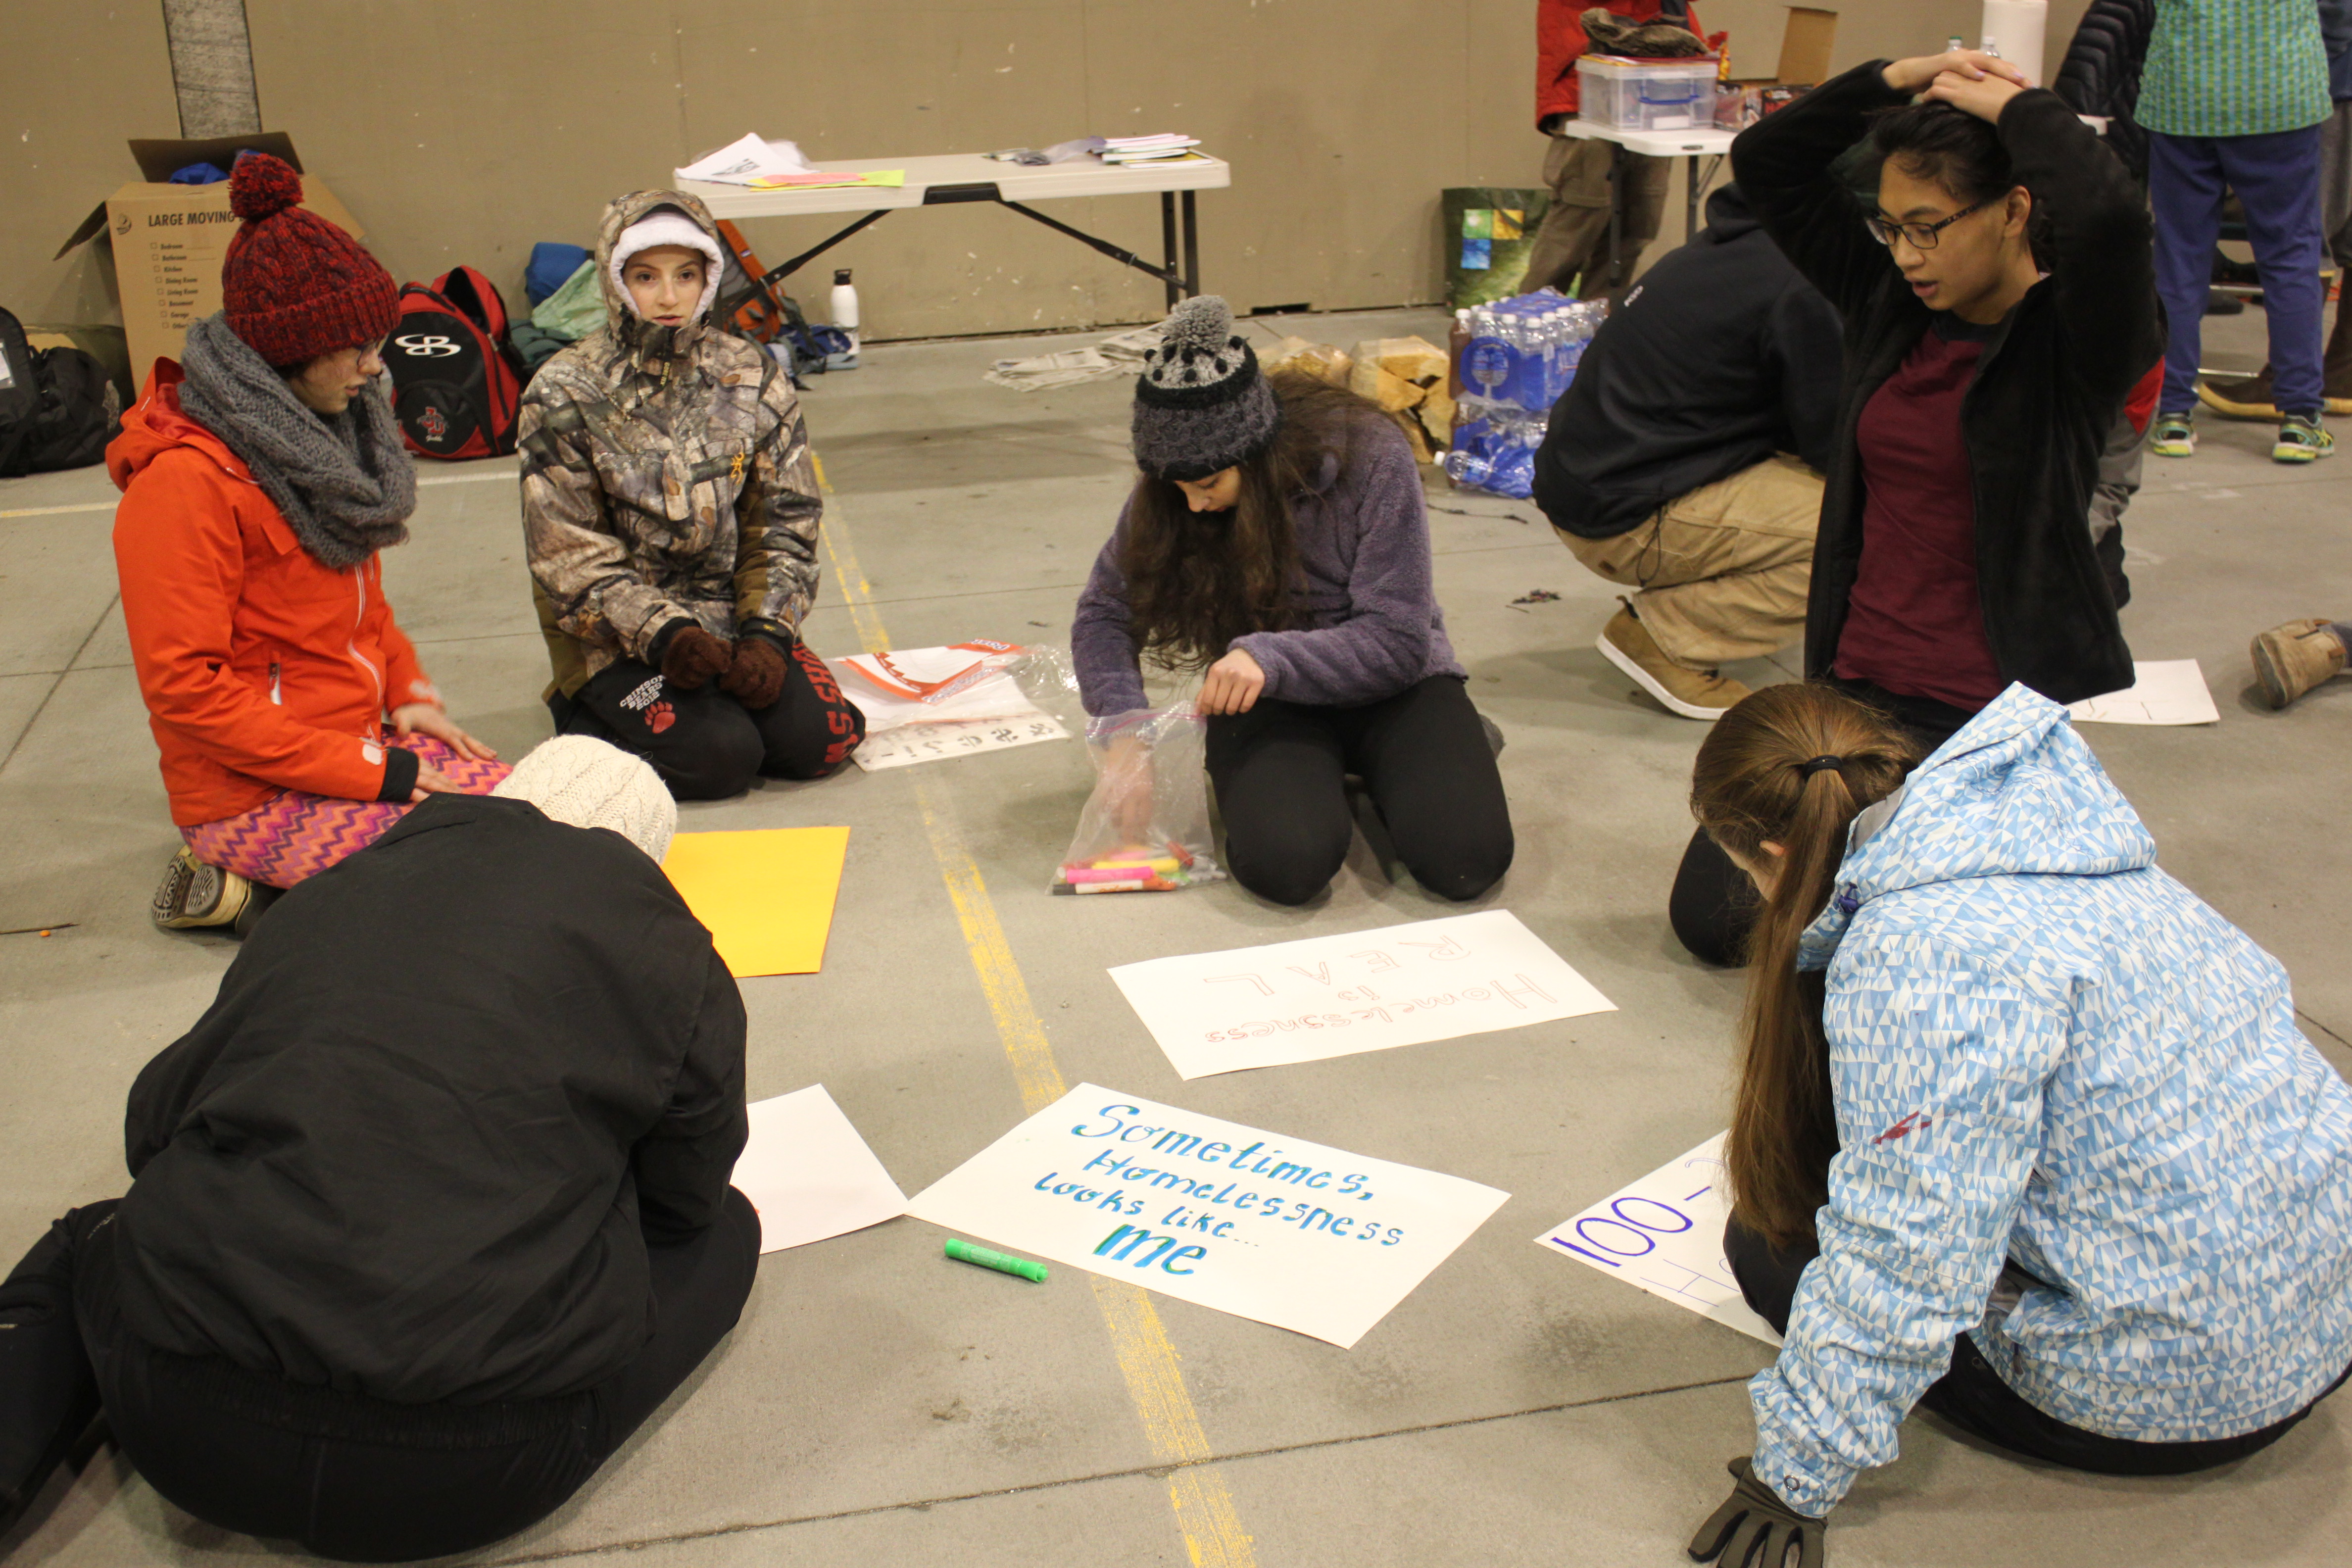 During the sleep out, students made signs about youth homelessness that they waved outside Mendenhall Mall and Safeway. (Photo by Lisa Phu/KTOO)